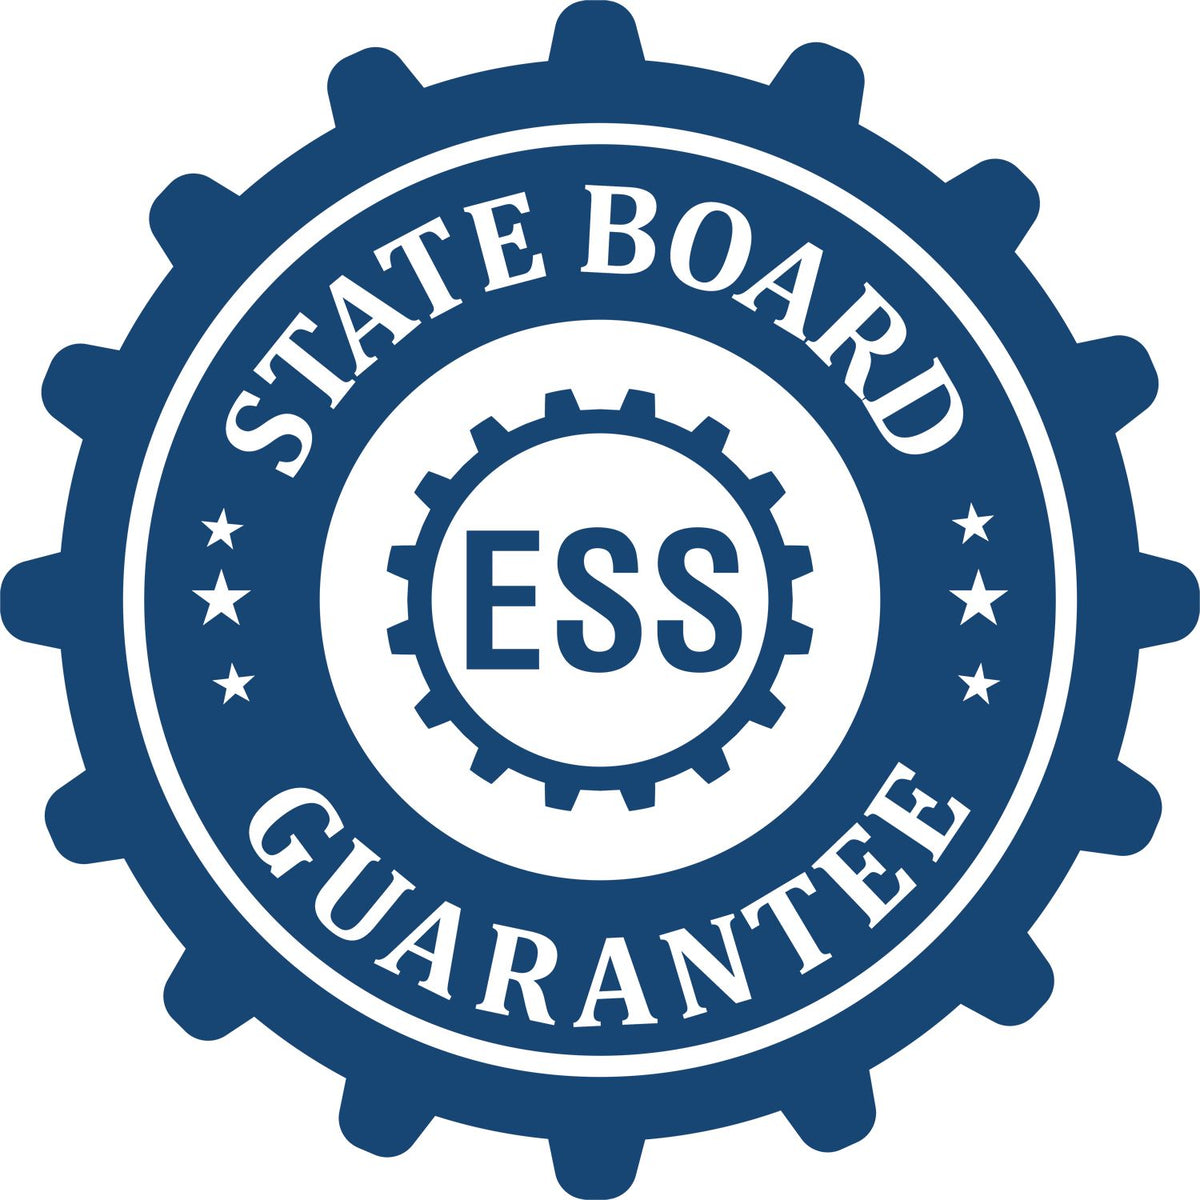 An emblem in a gear shape illustrating a state board guarantee for the Gift Utah Engineer Seal